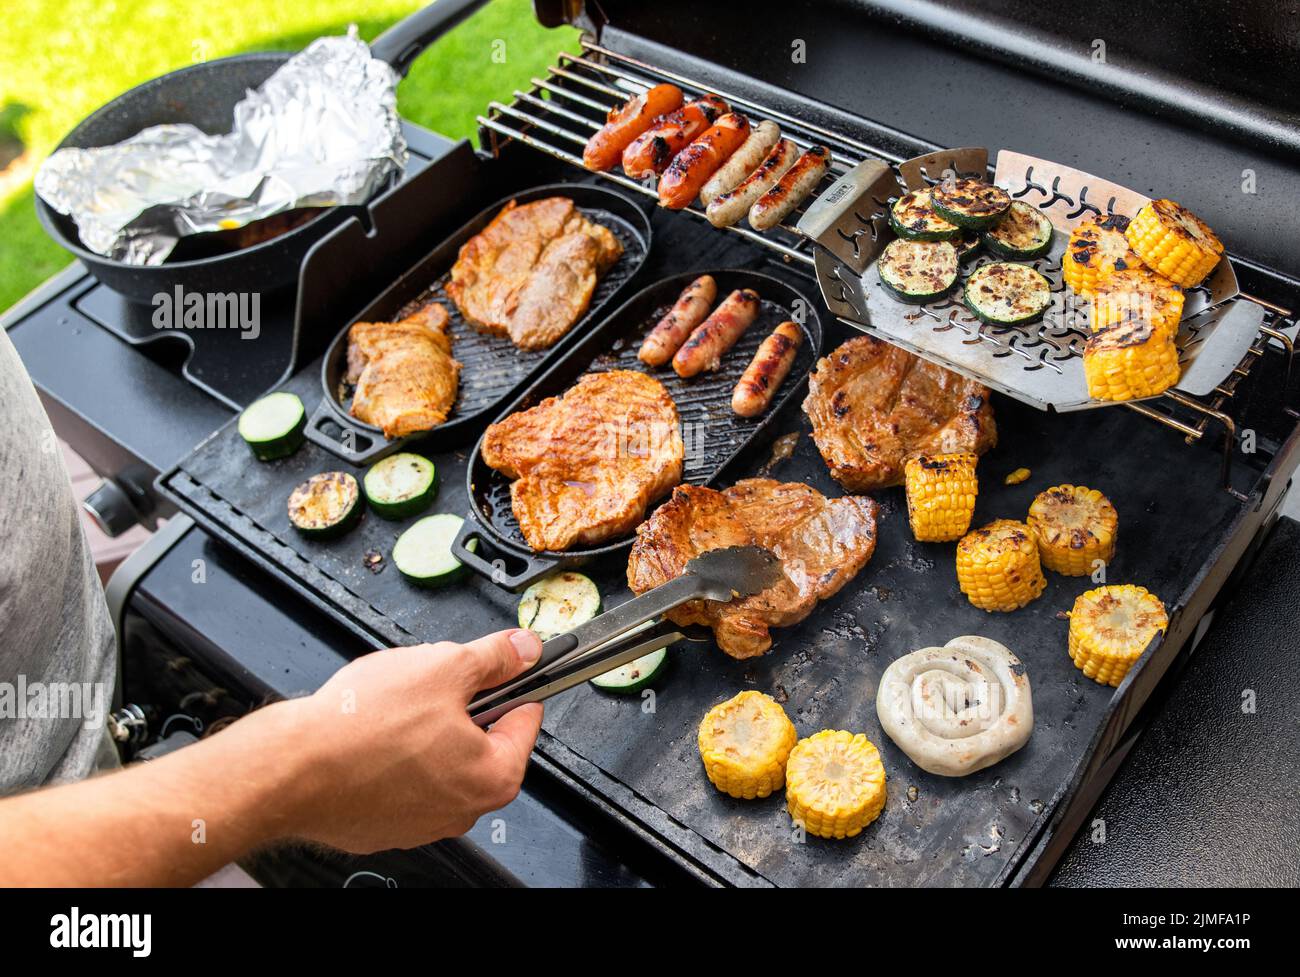 grill barbecue outdoors on the backyard. Bbq party. Stock Photo